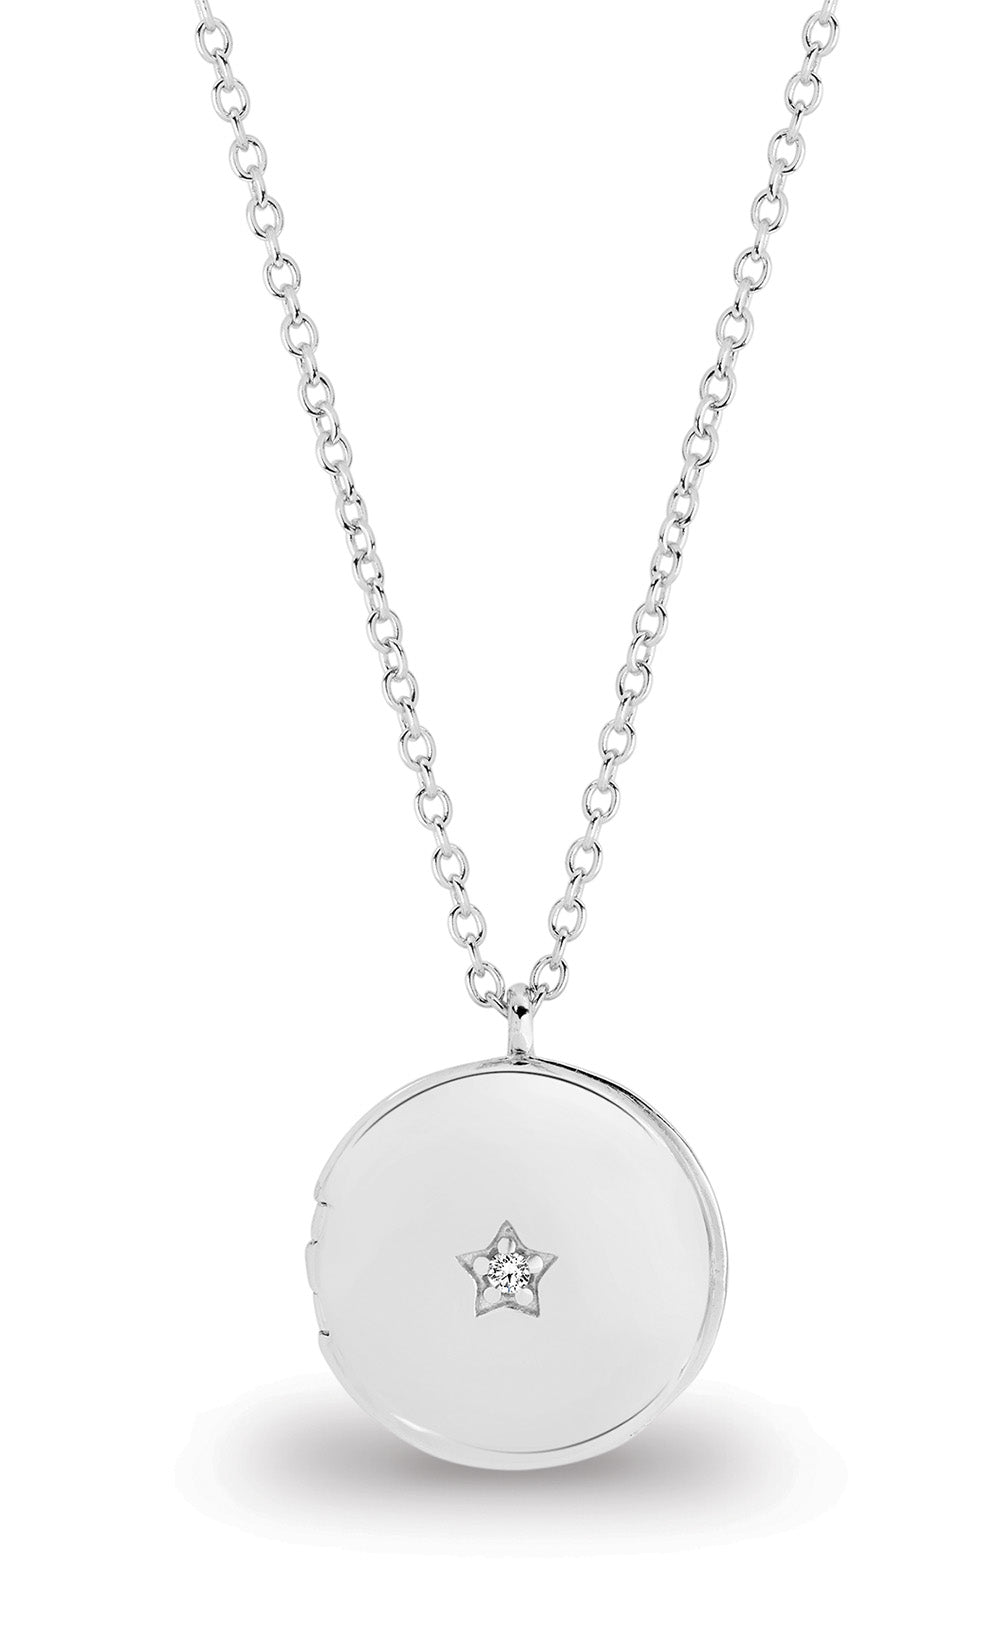 Sterling Silver Locket with CZ. 45 + 5cm